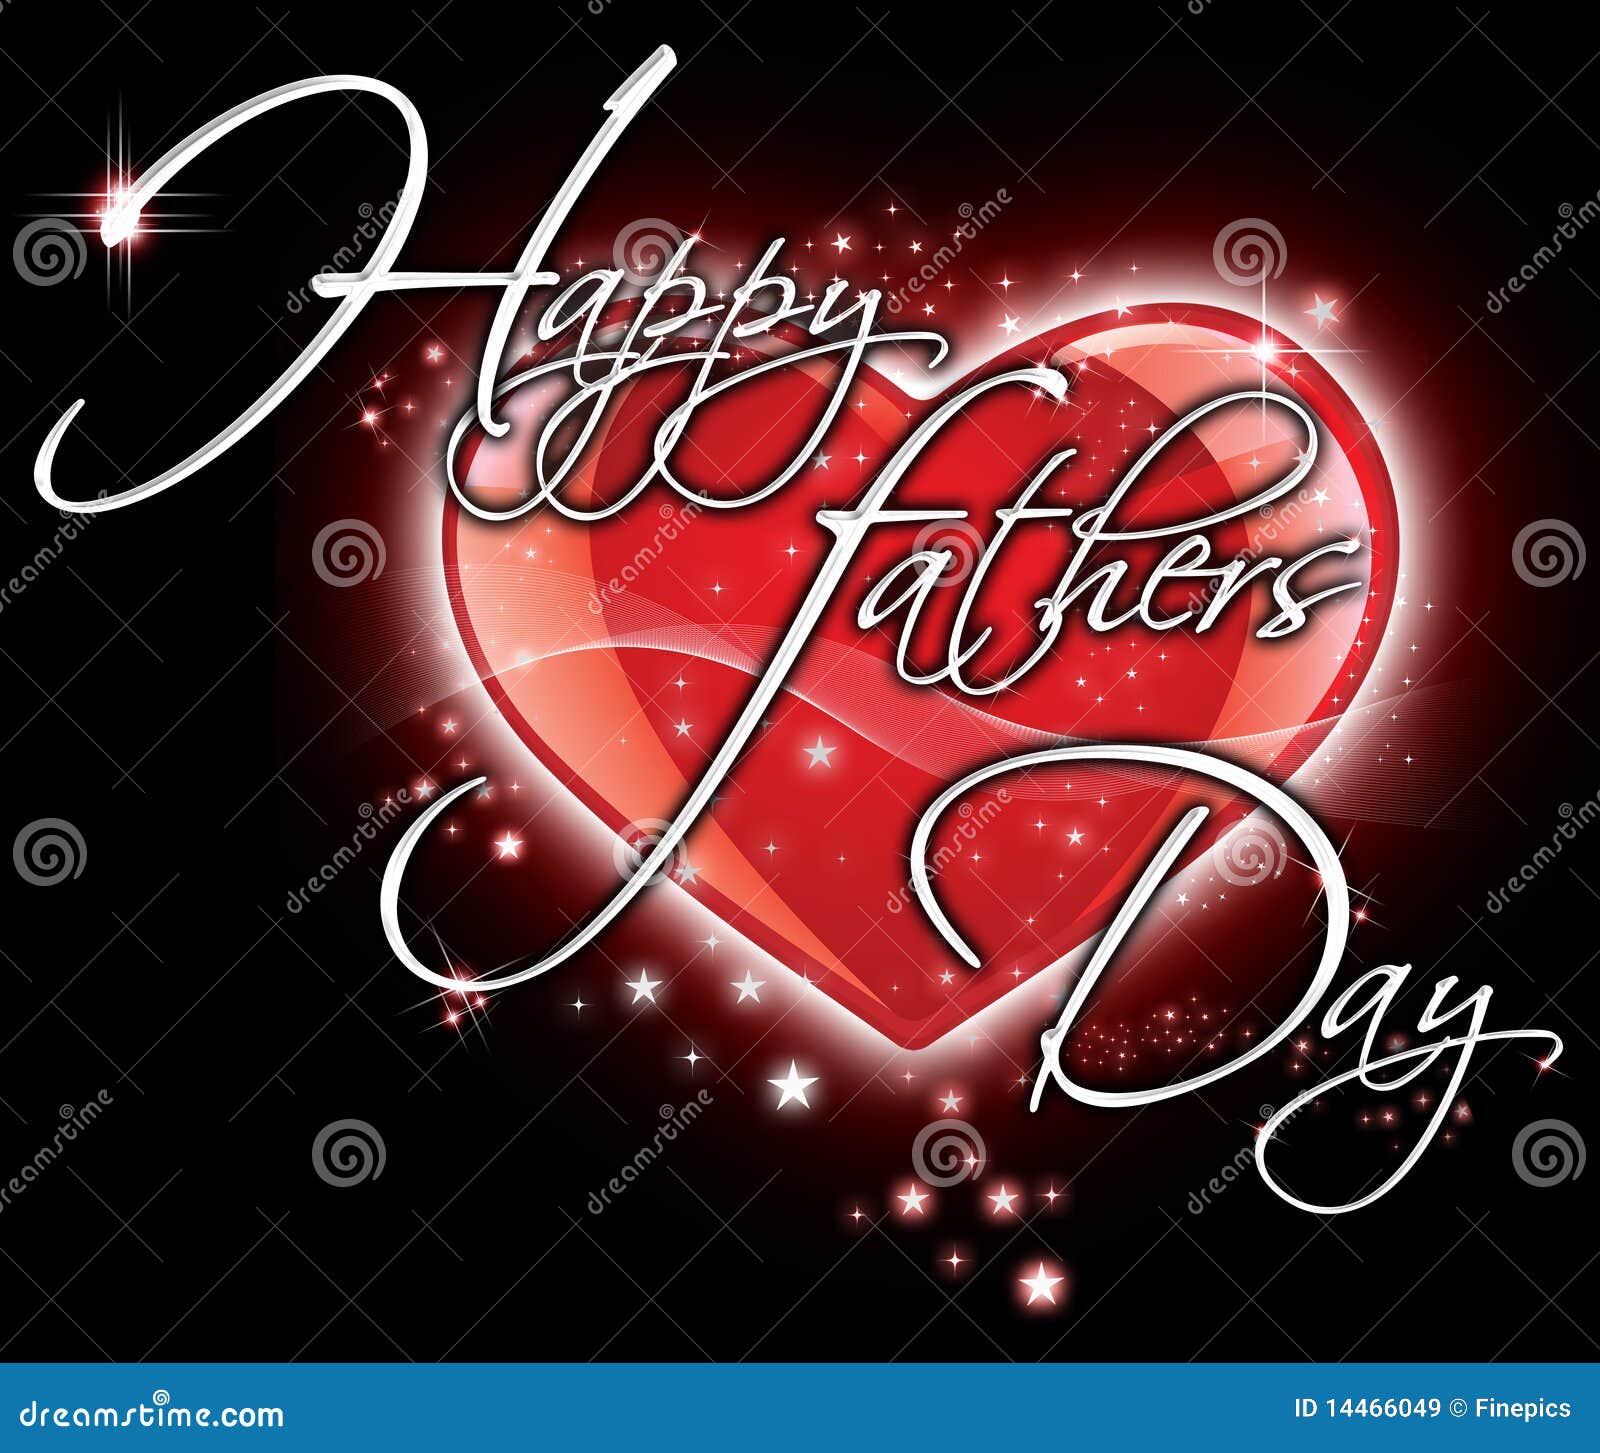 Happy Fathers Day Card Royalty Free Stock Images Image 25145289